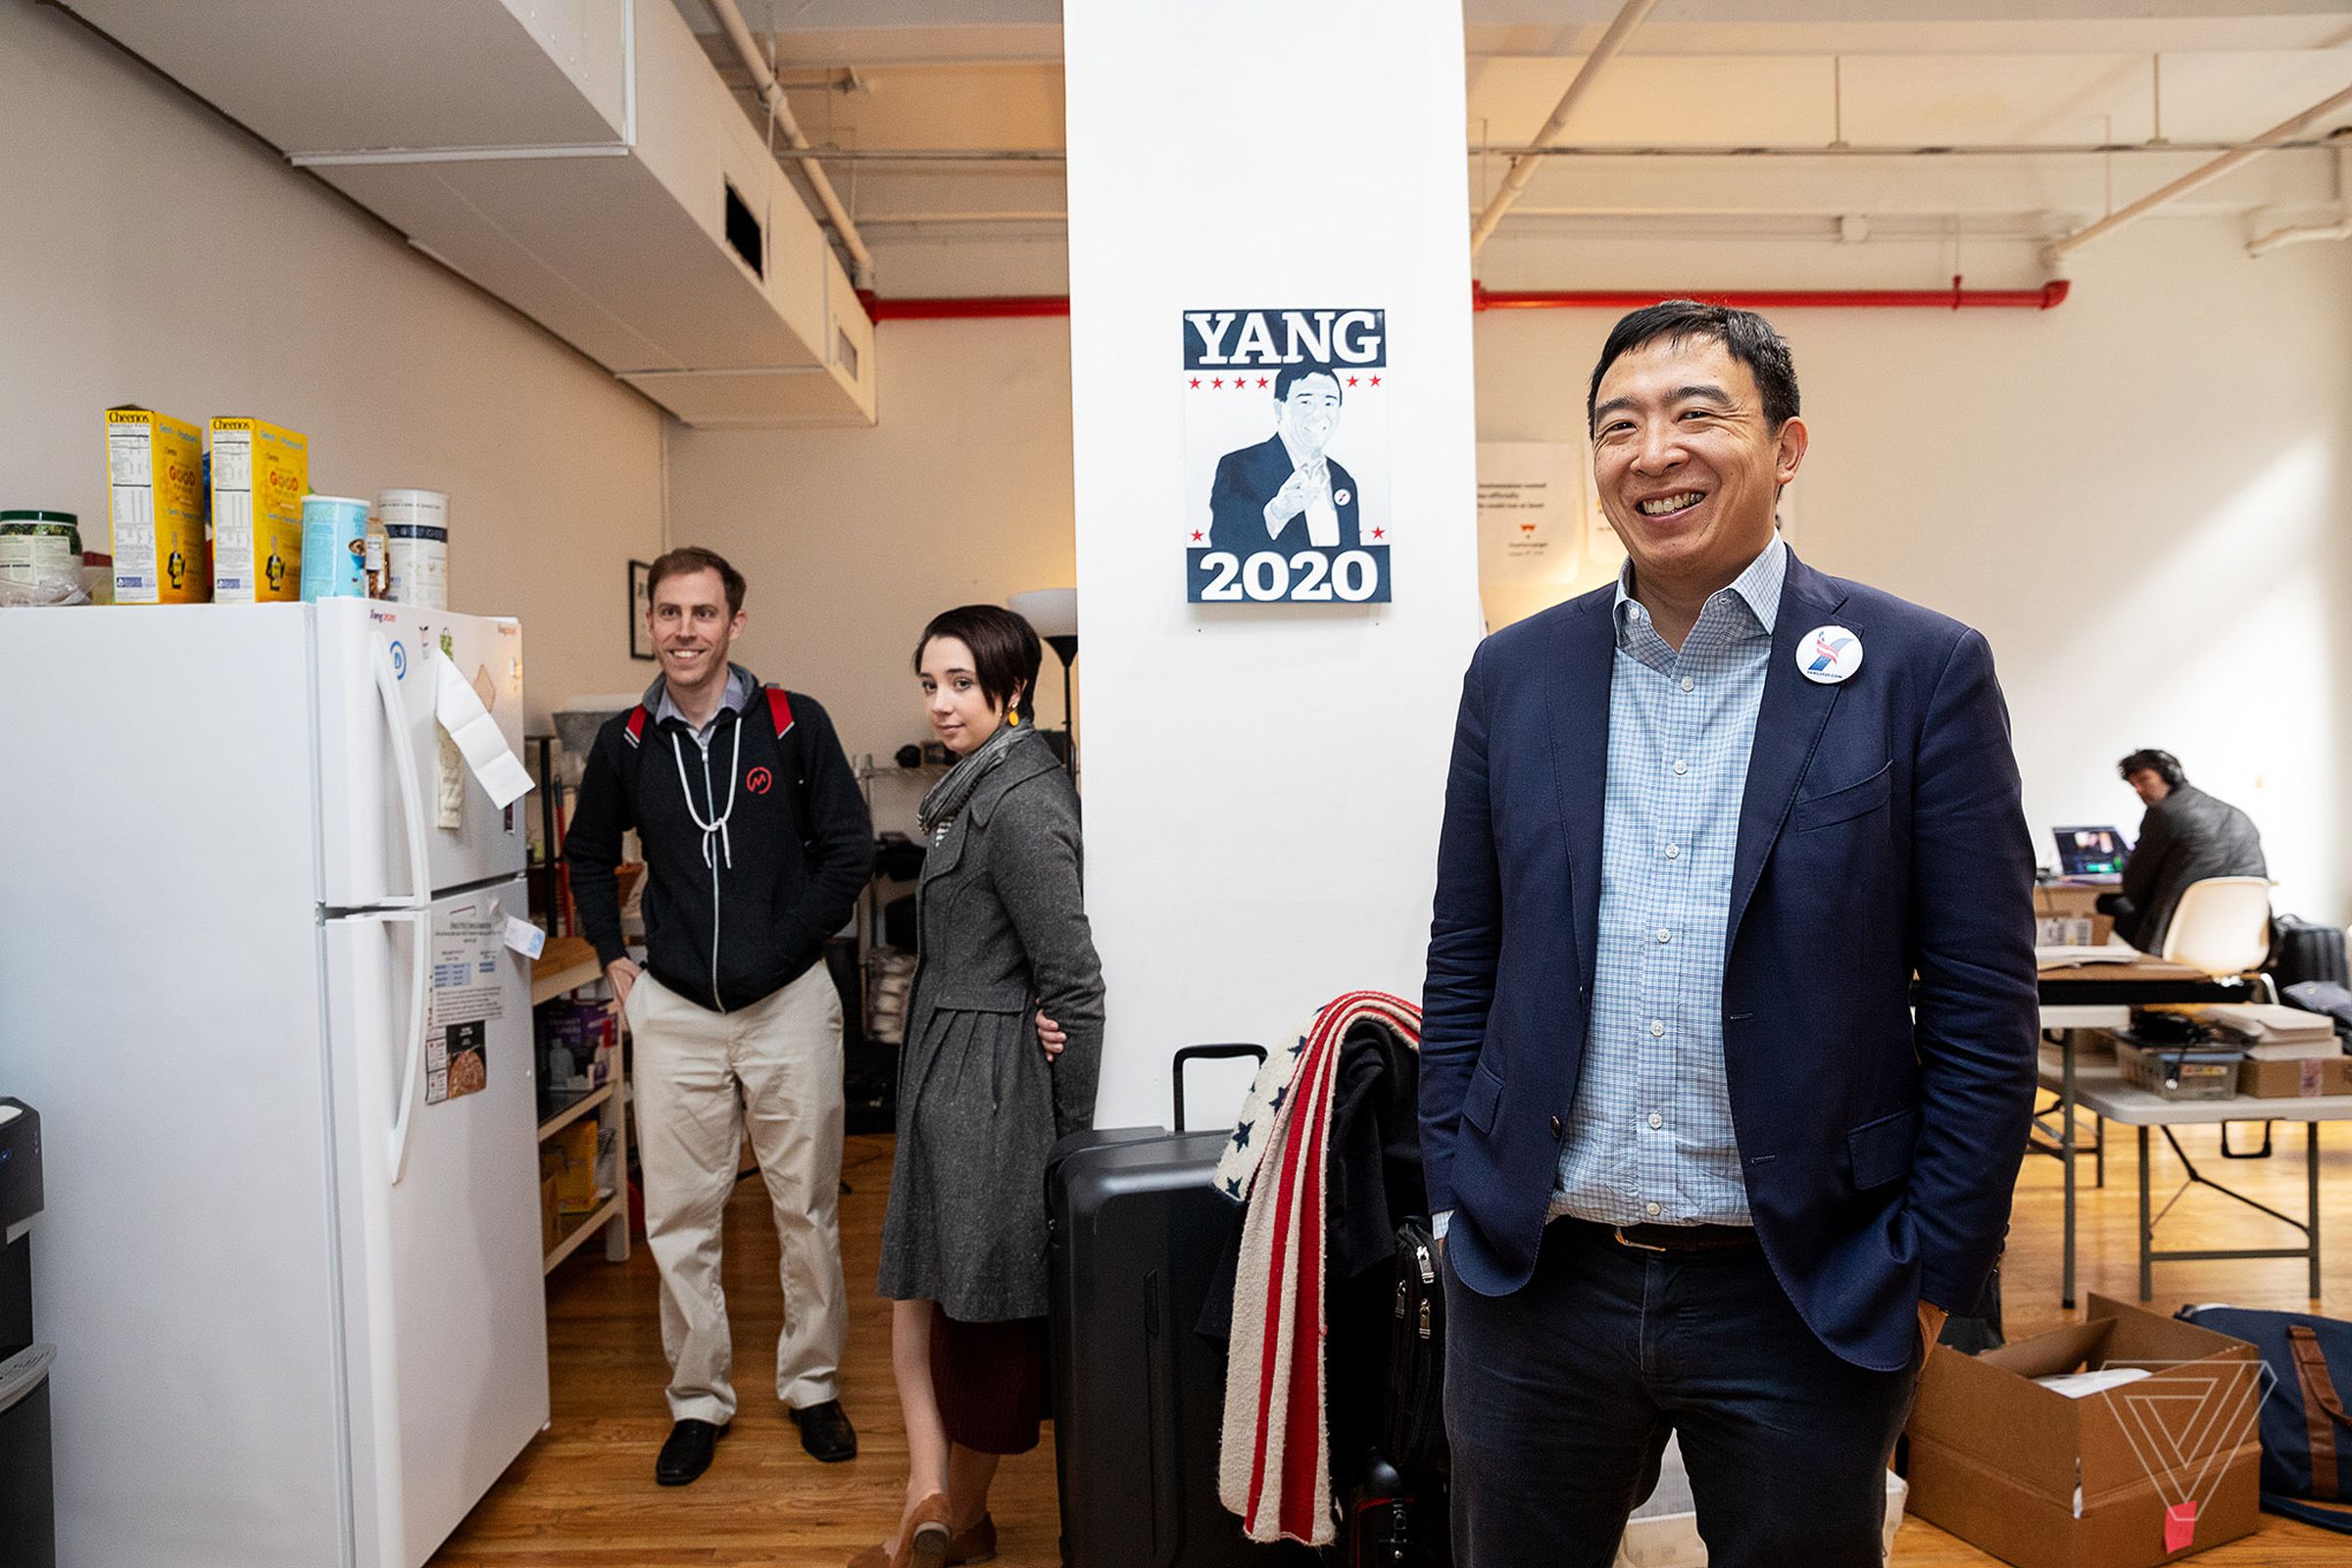 Yang with campaign staff in the New York office.